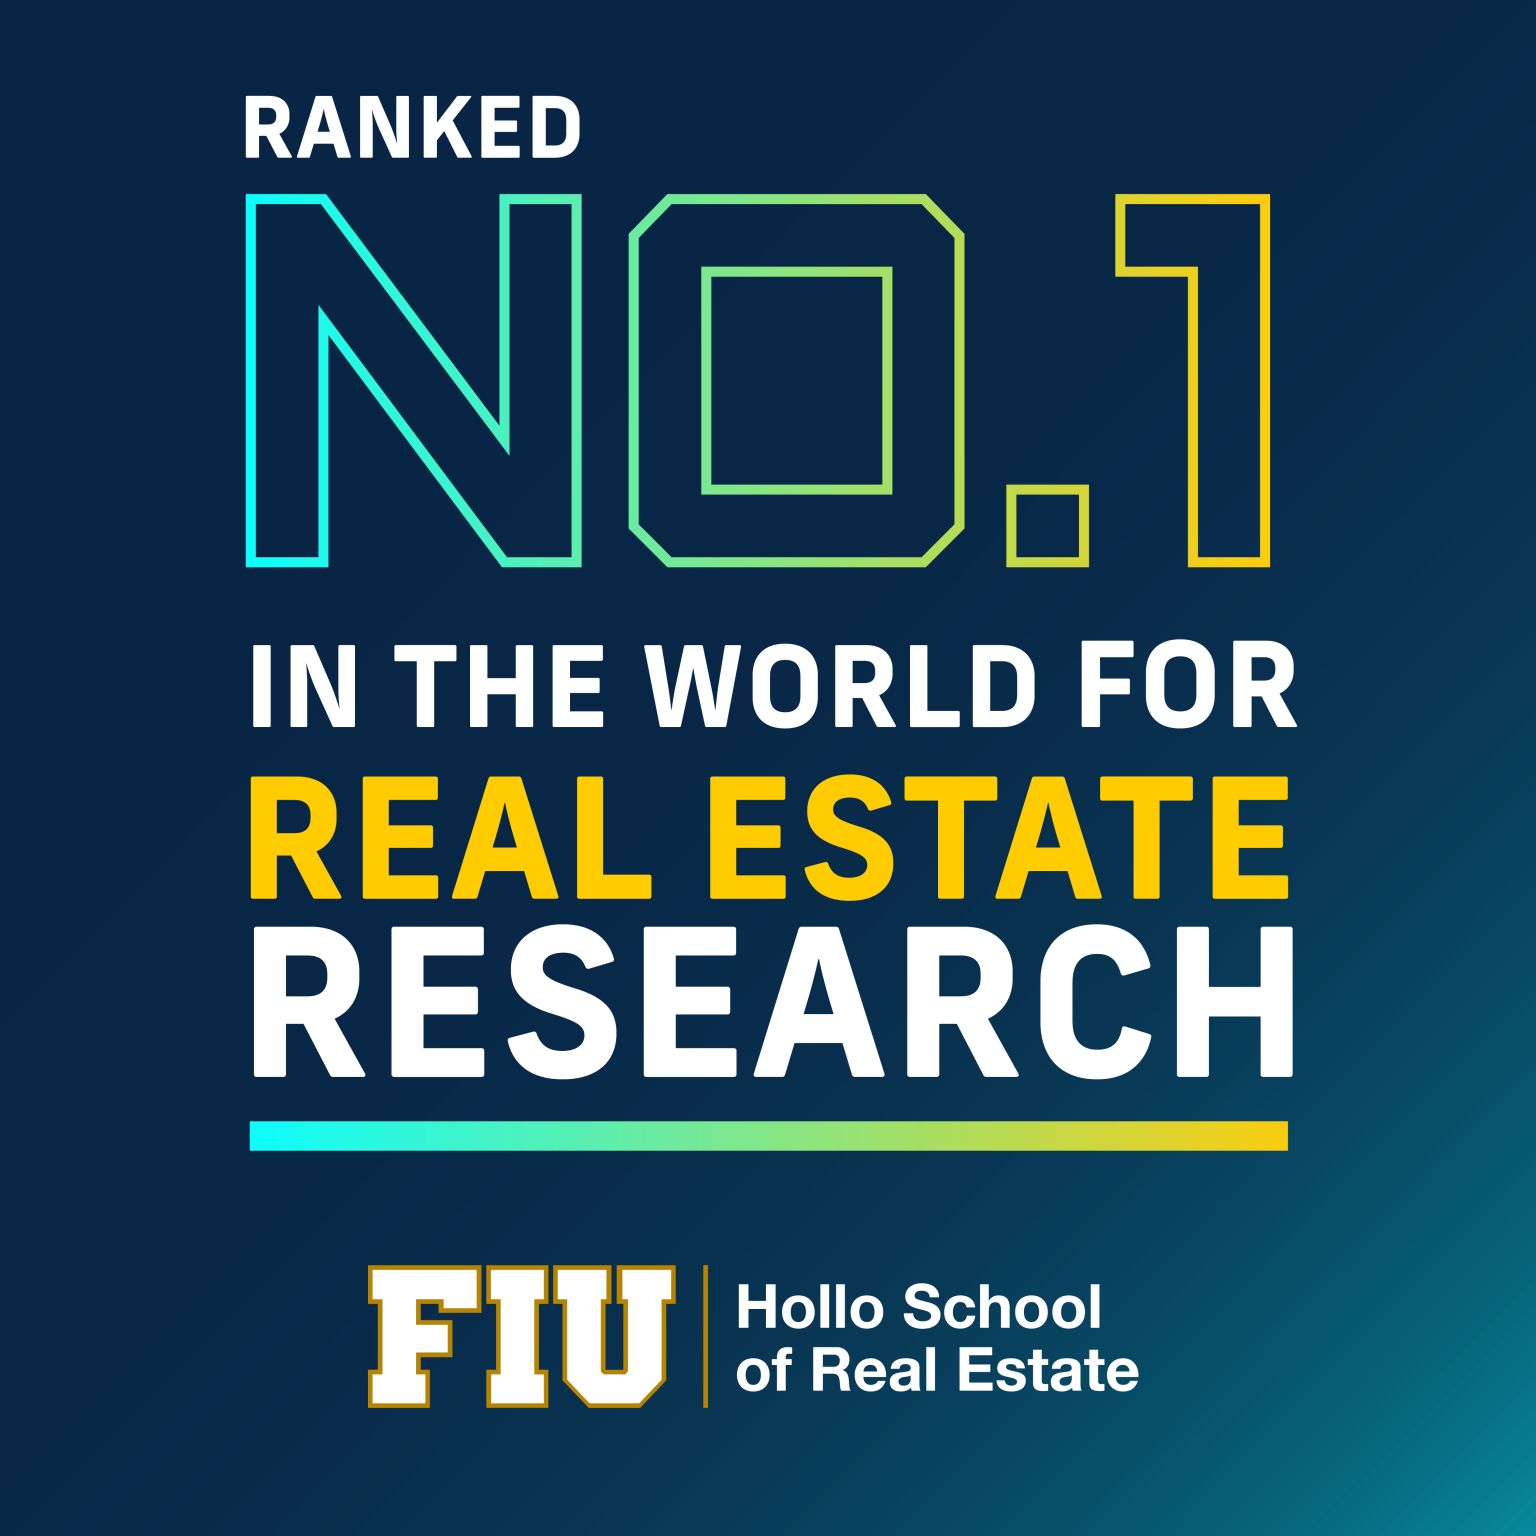 FIU Business has been ranked No.1 globally for real estate research productivity by the Journal of Real Estate Literature.